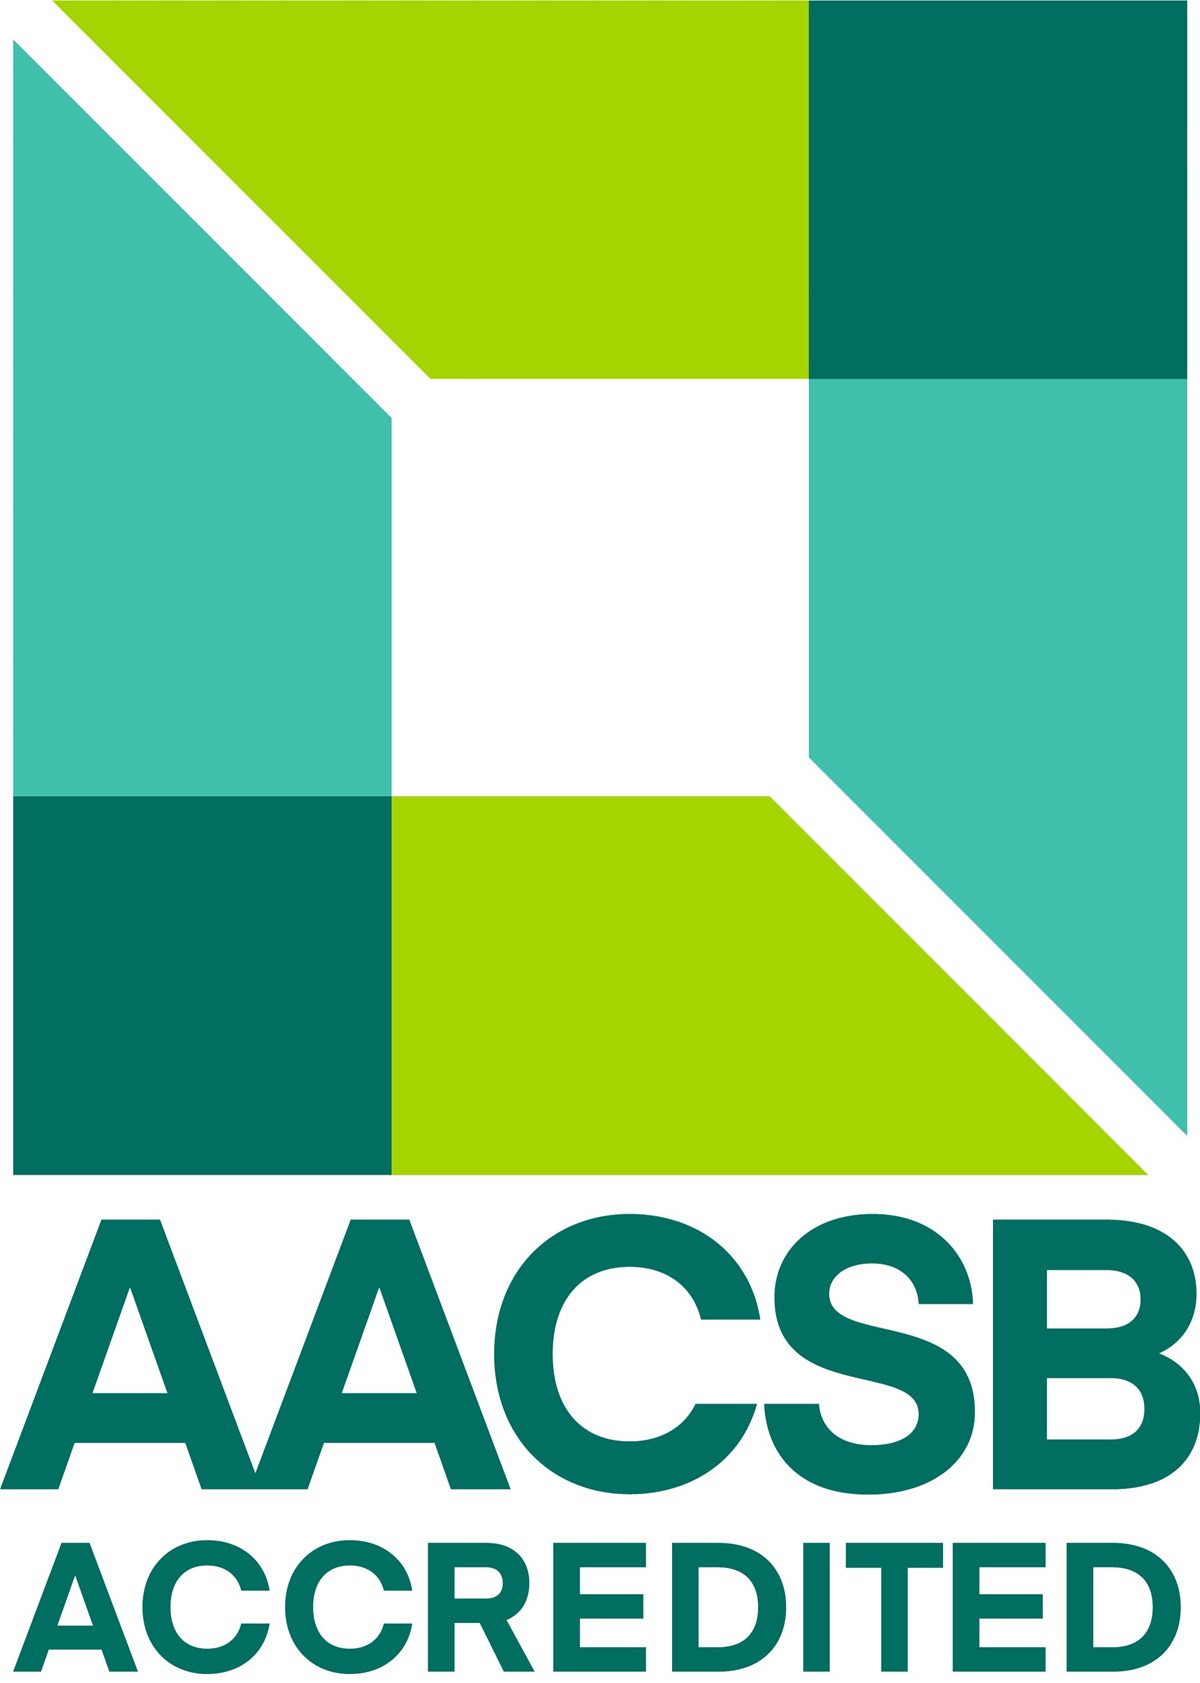 AACSB seal - accredited by the Association to Advance Collegiate Schools of Business (AACSB) International. This is the highest level of business school accreditation an institution can achieve in the United States.